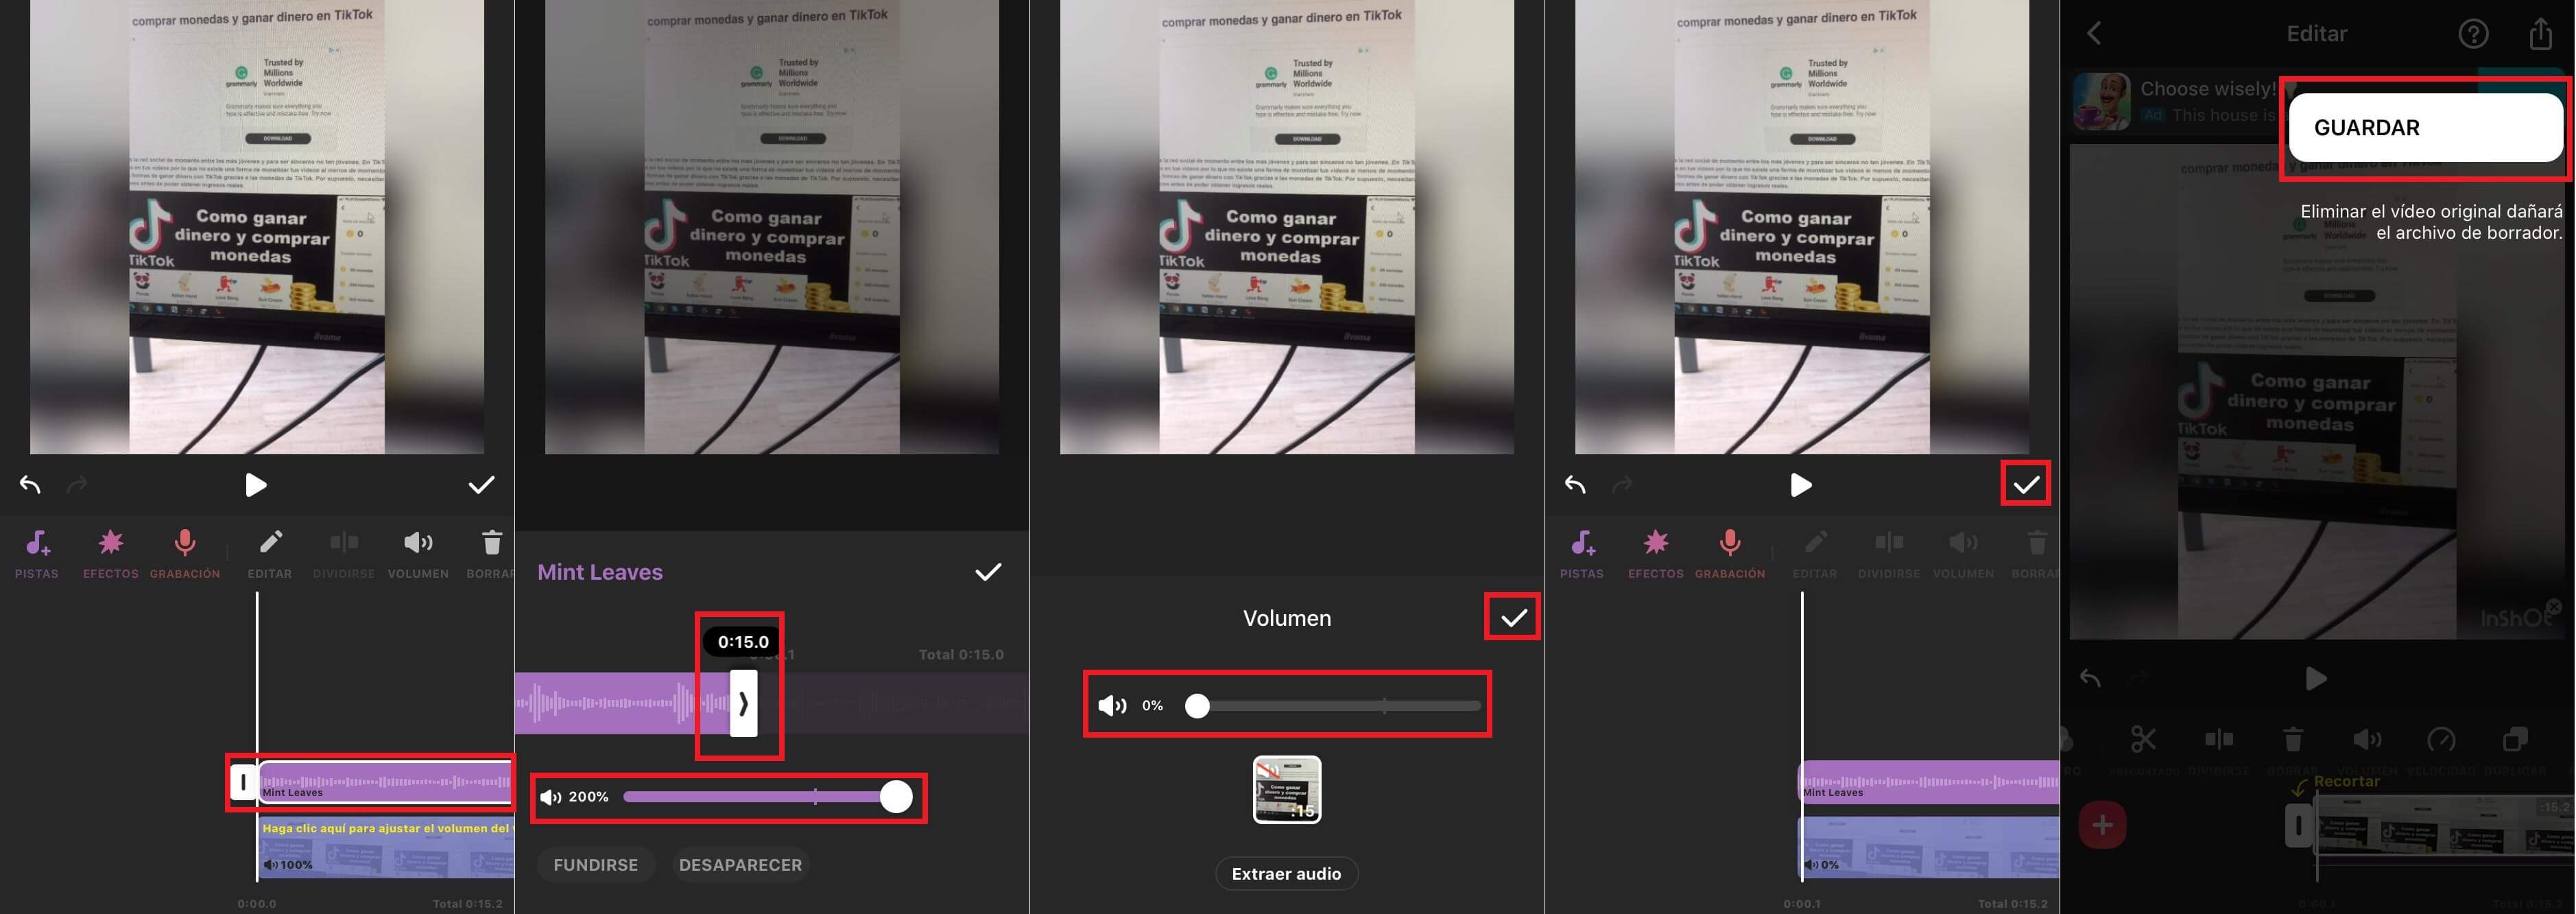 How to add your own music or audio to TikTok videos.